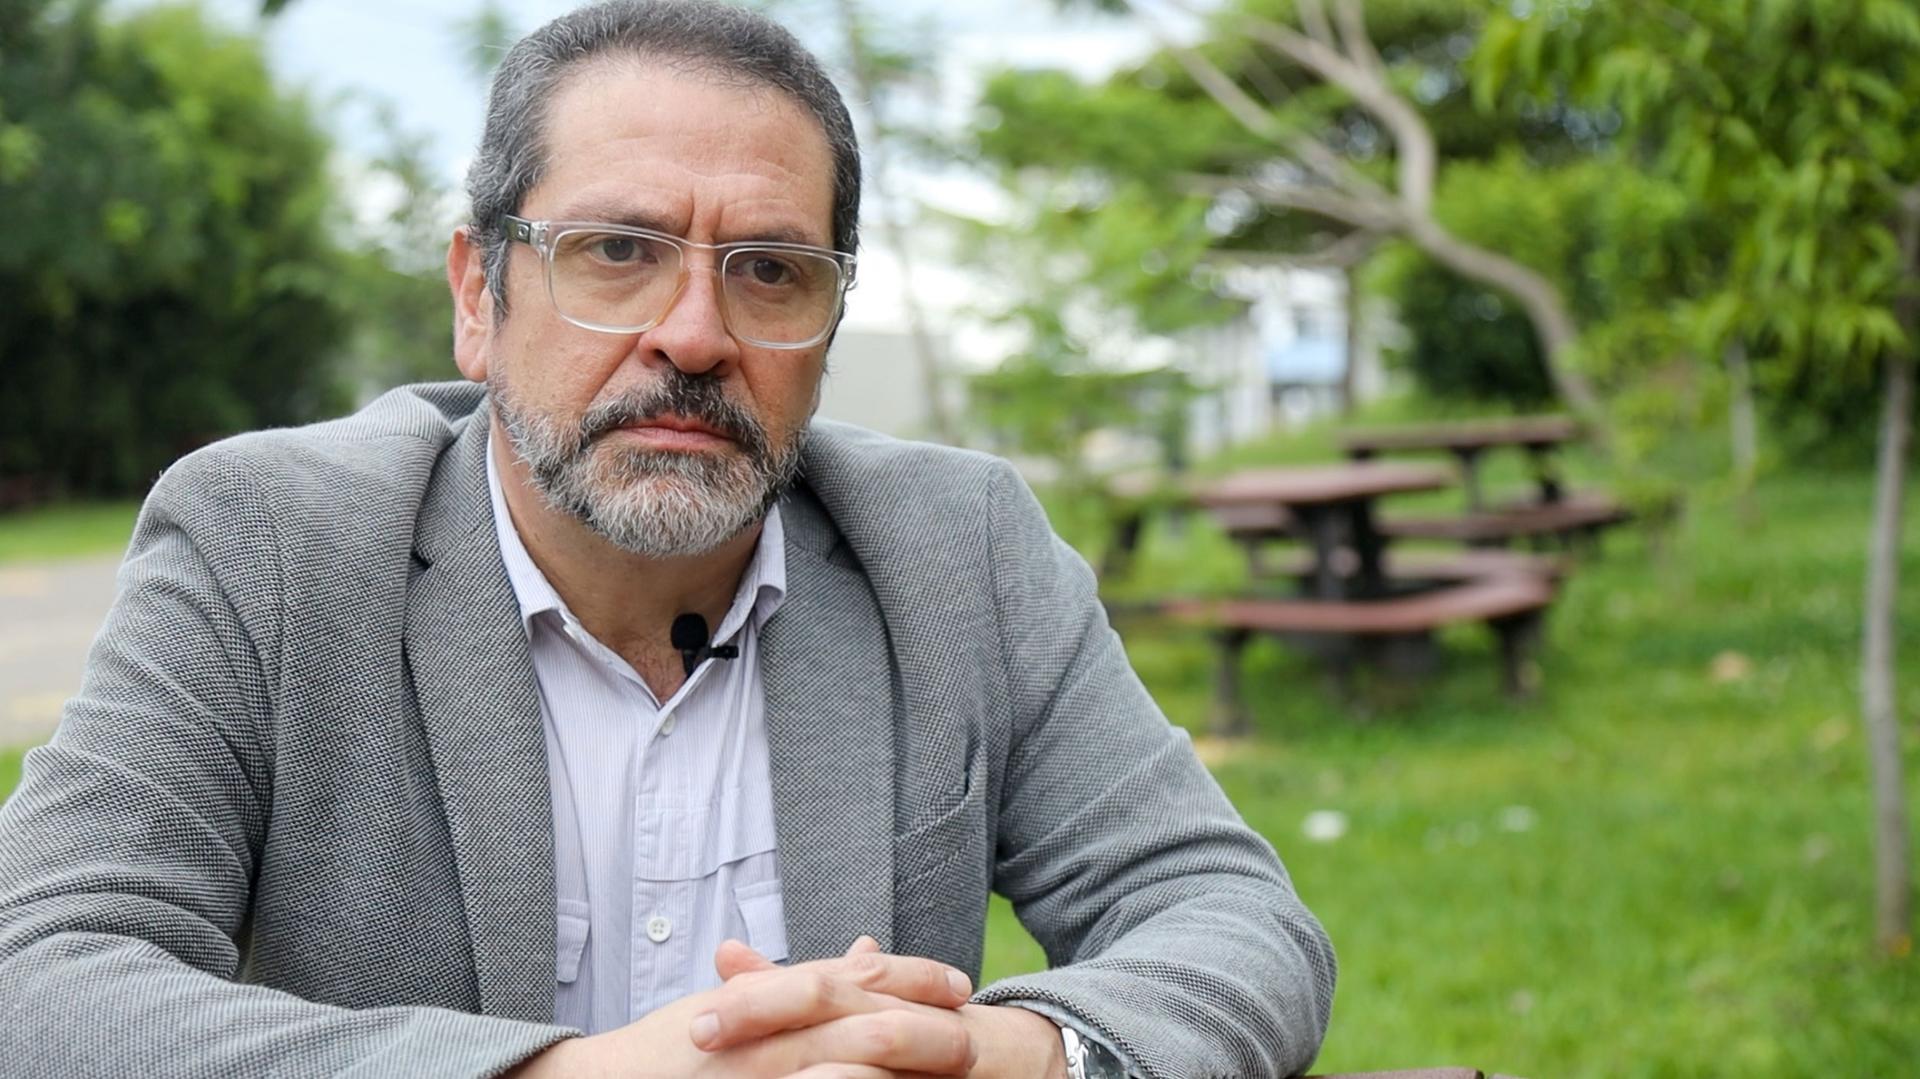 Rotsay Rosales is a political scientist at the University of Costa Rica.